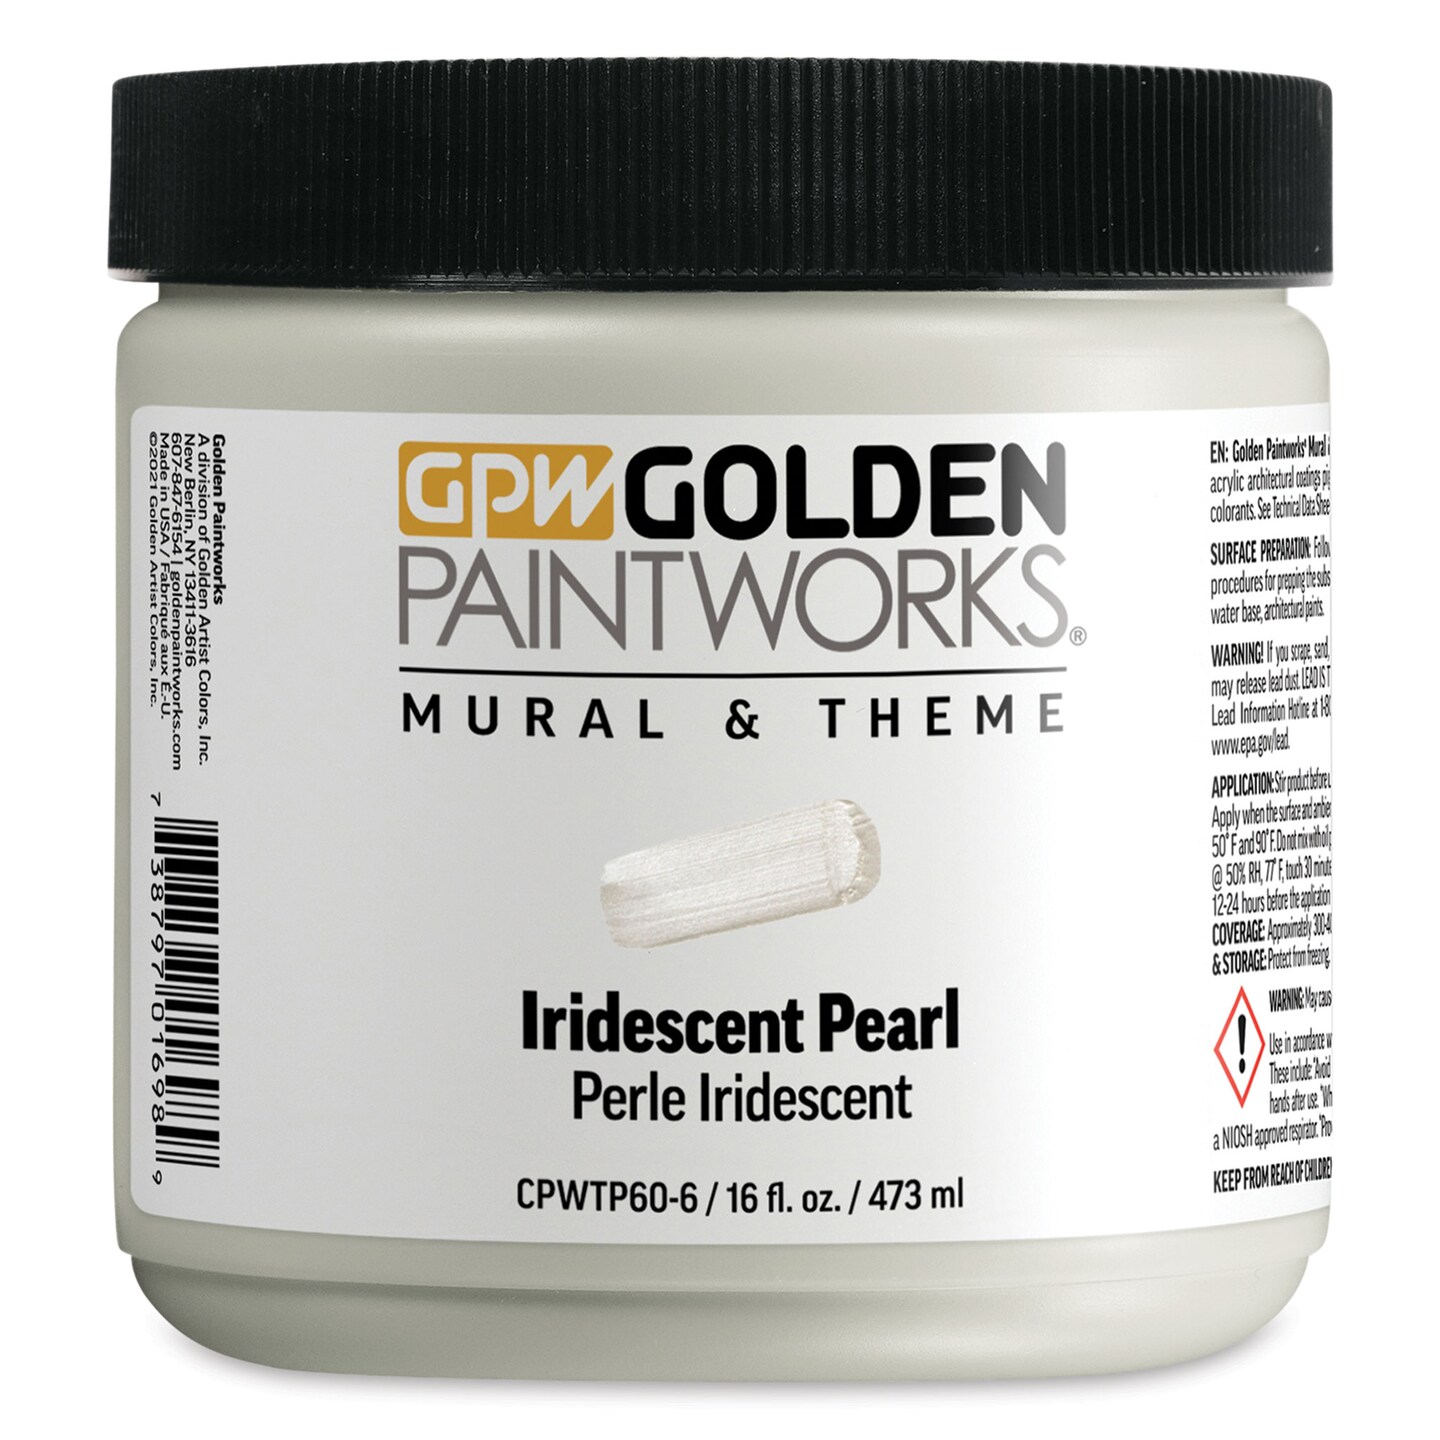 Golden Paintworks Mural and Theme Acrylic Paint - Iridescent Pearl, 16 oz, Jar